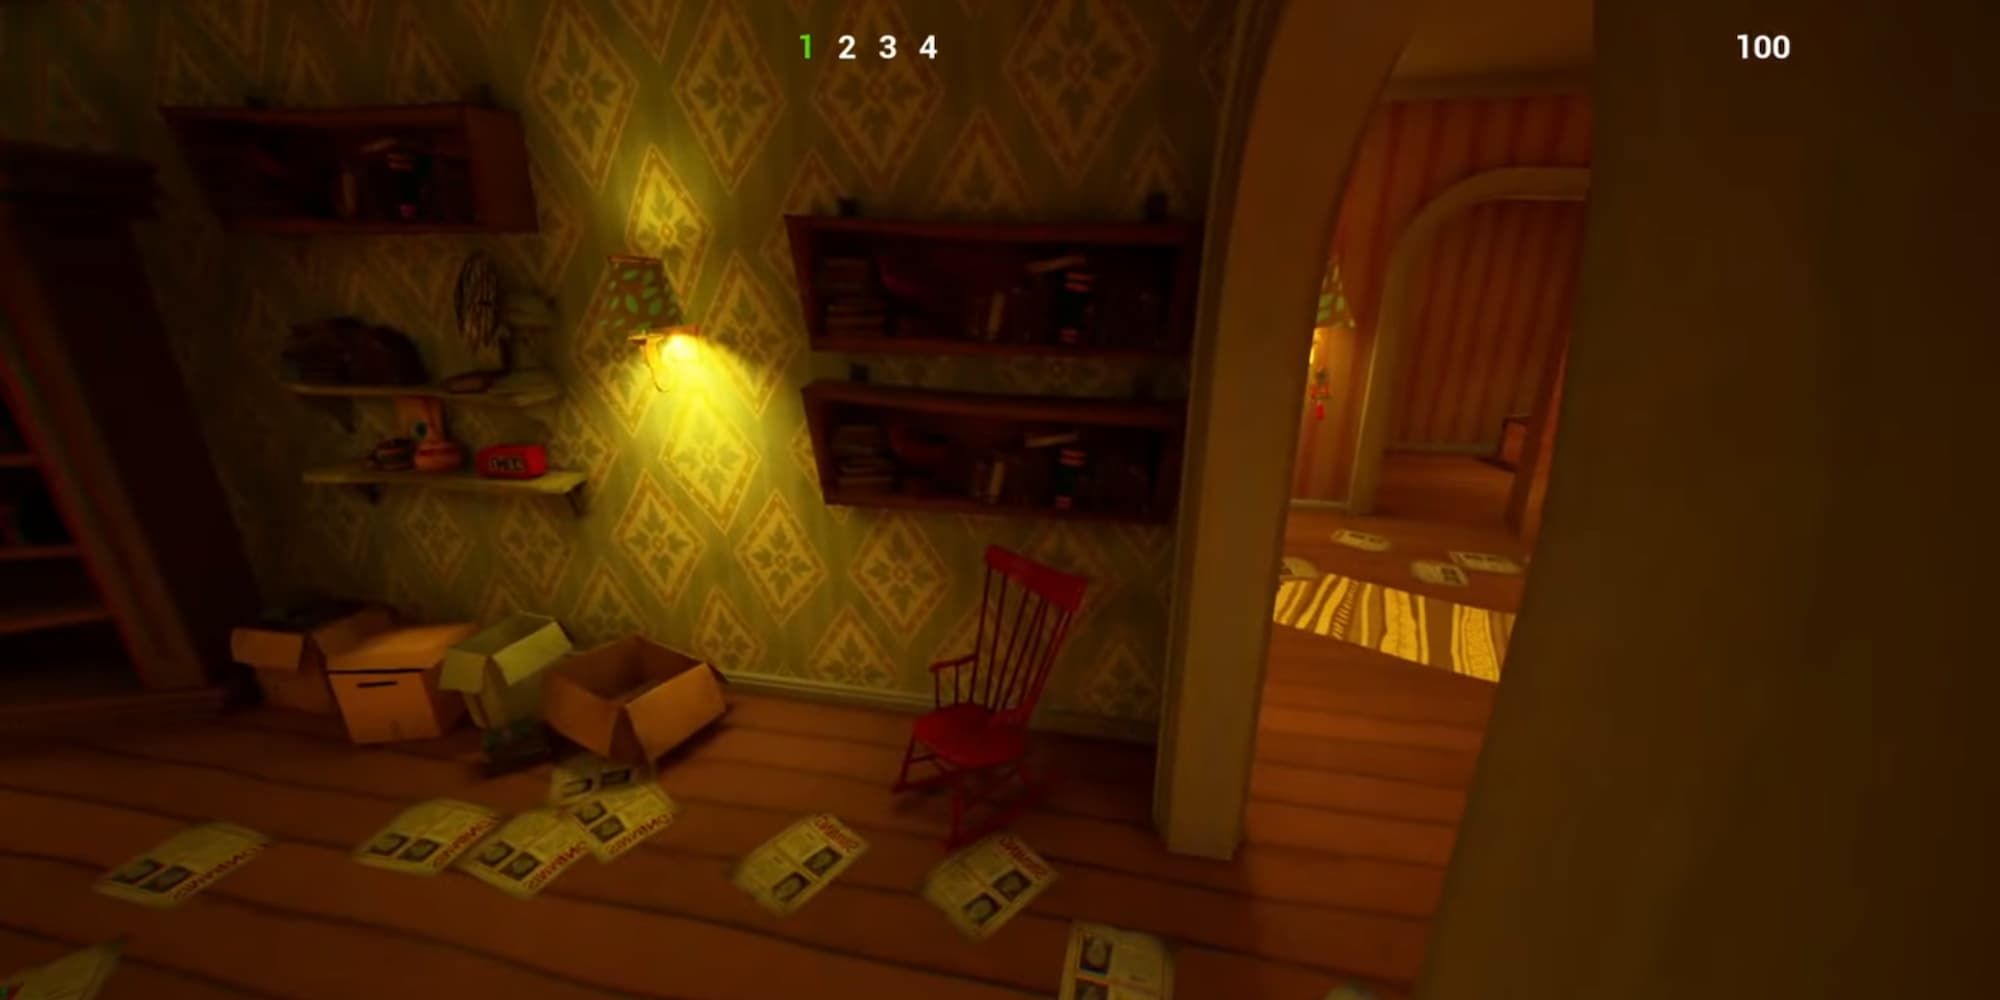 A Security Camera looks over a room in Hello Neighbor 2.